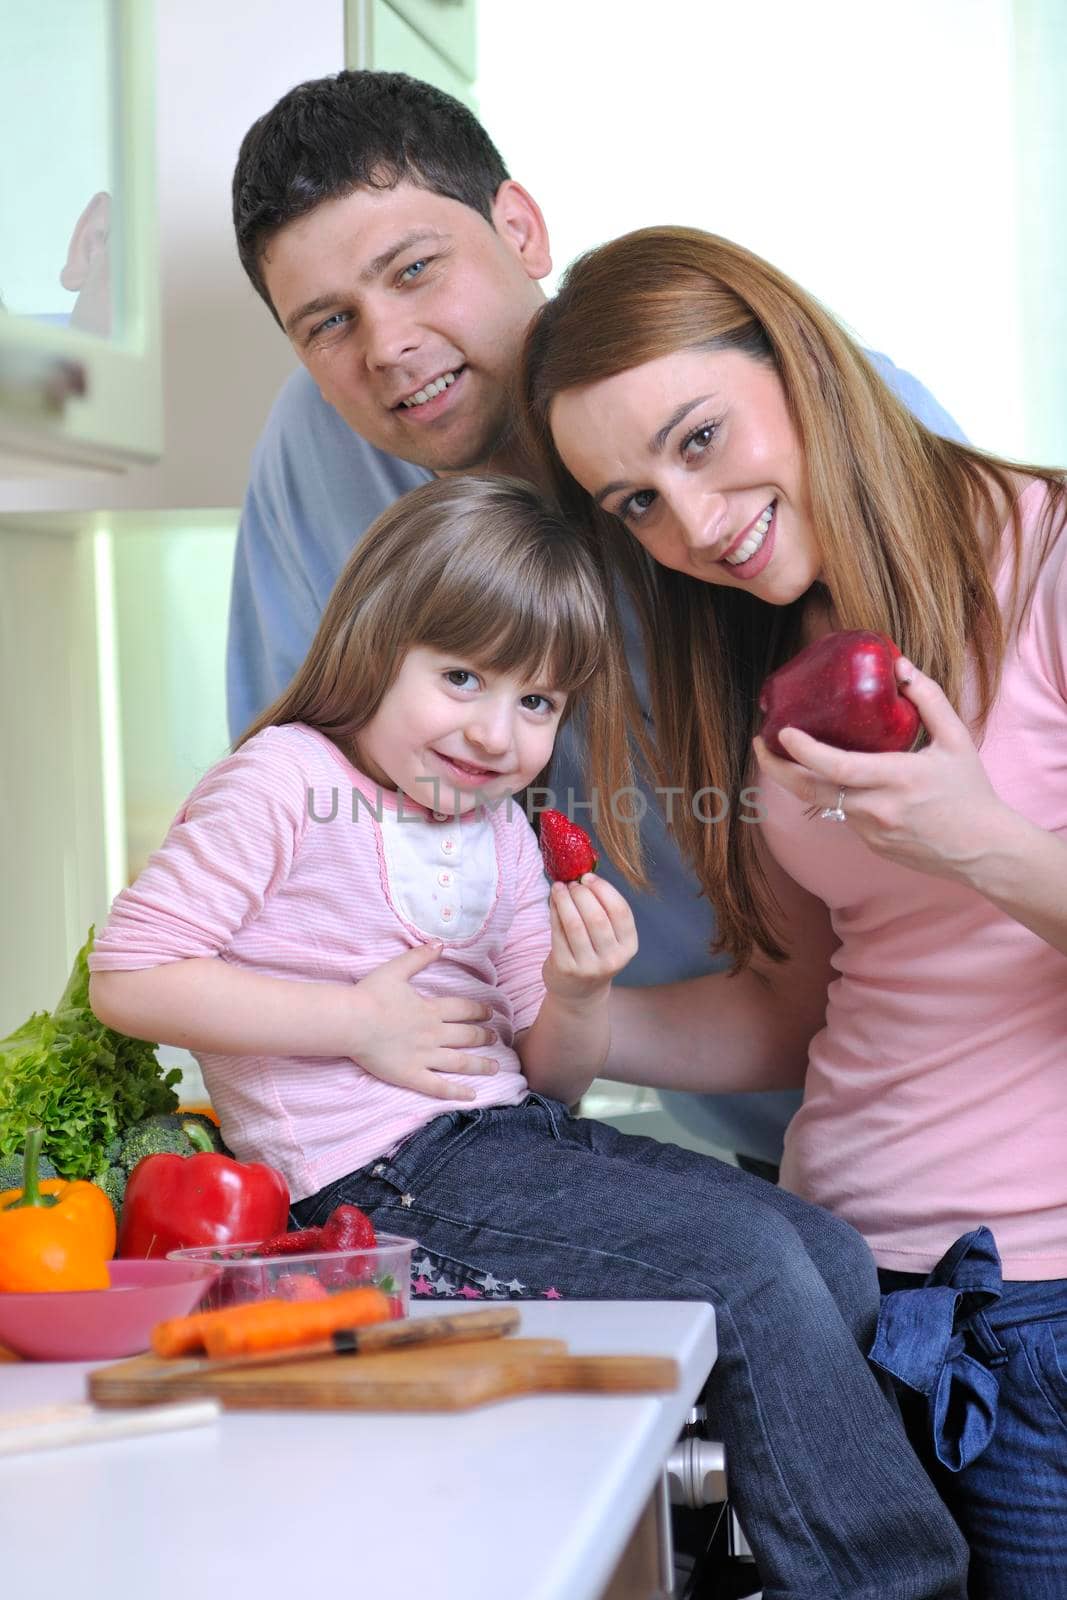 happy young family have lunch time with fresh fruits and vegetable food in bright kitchen 